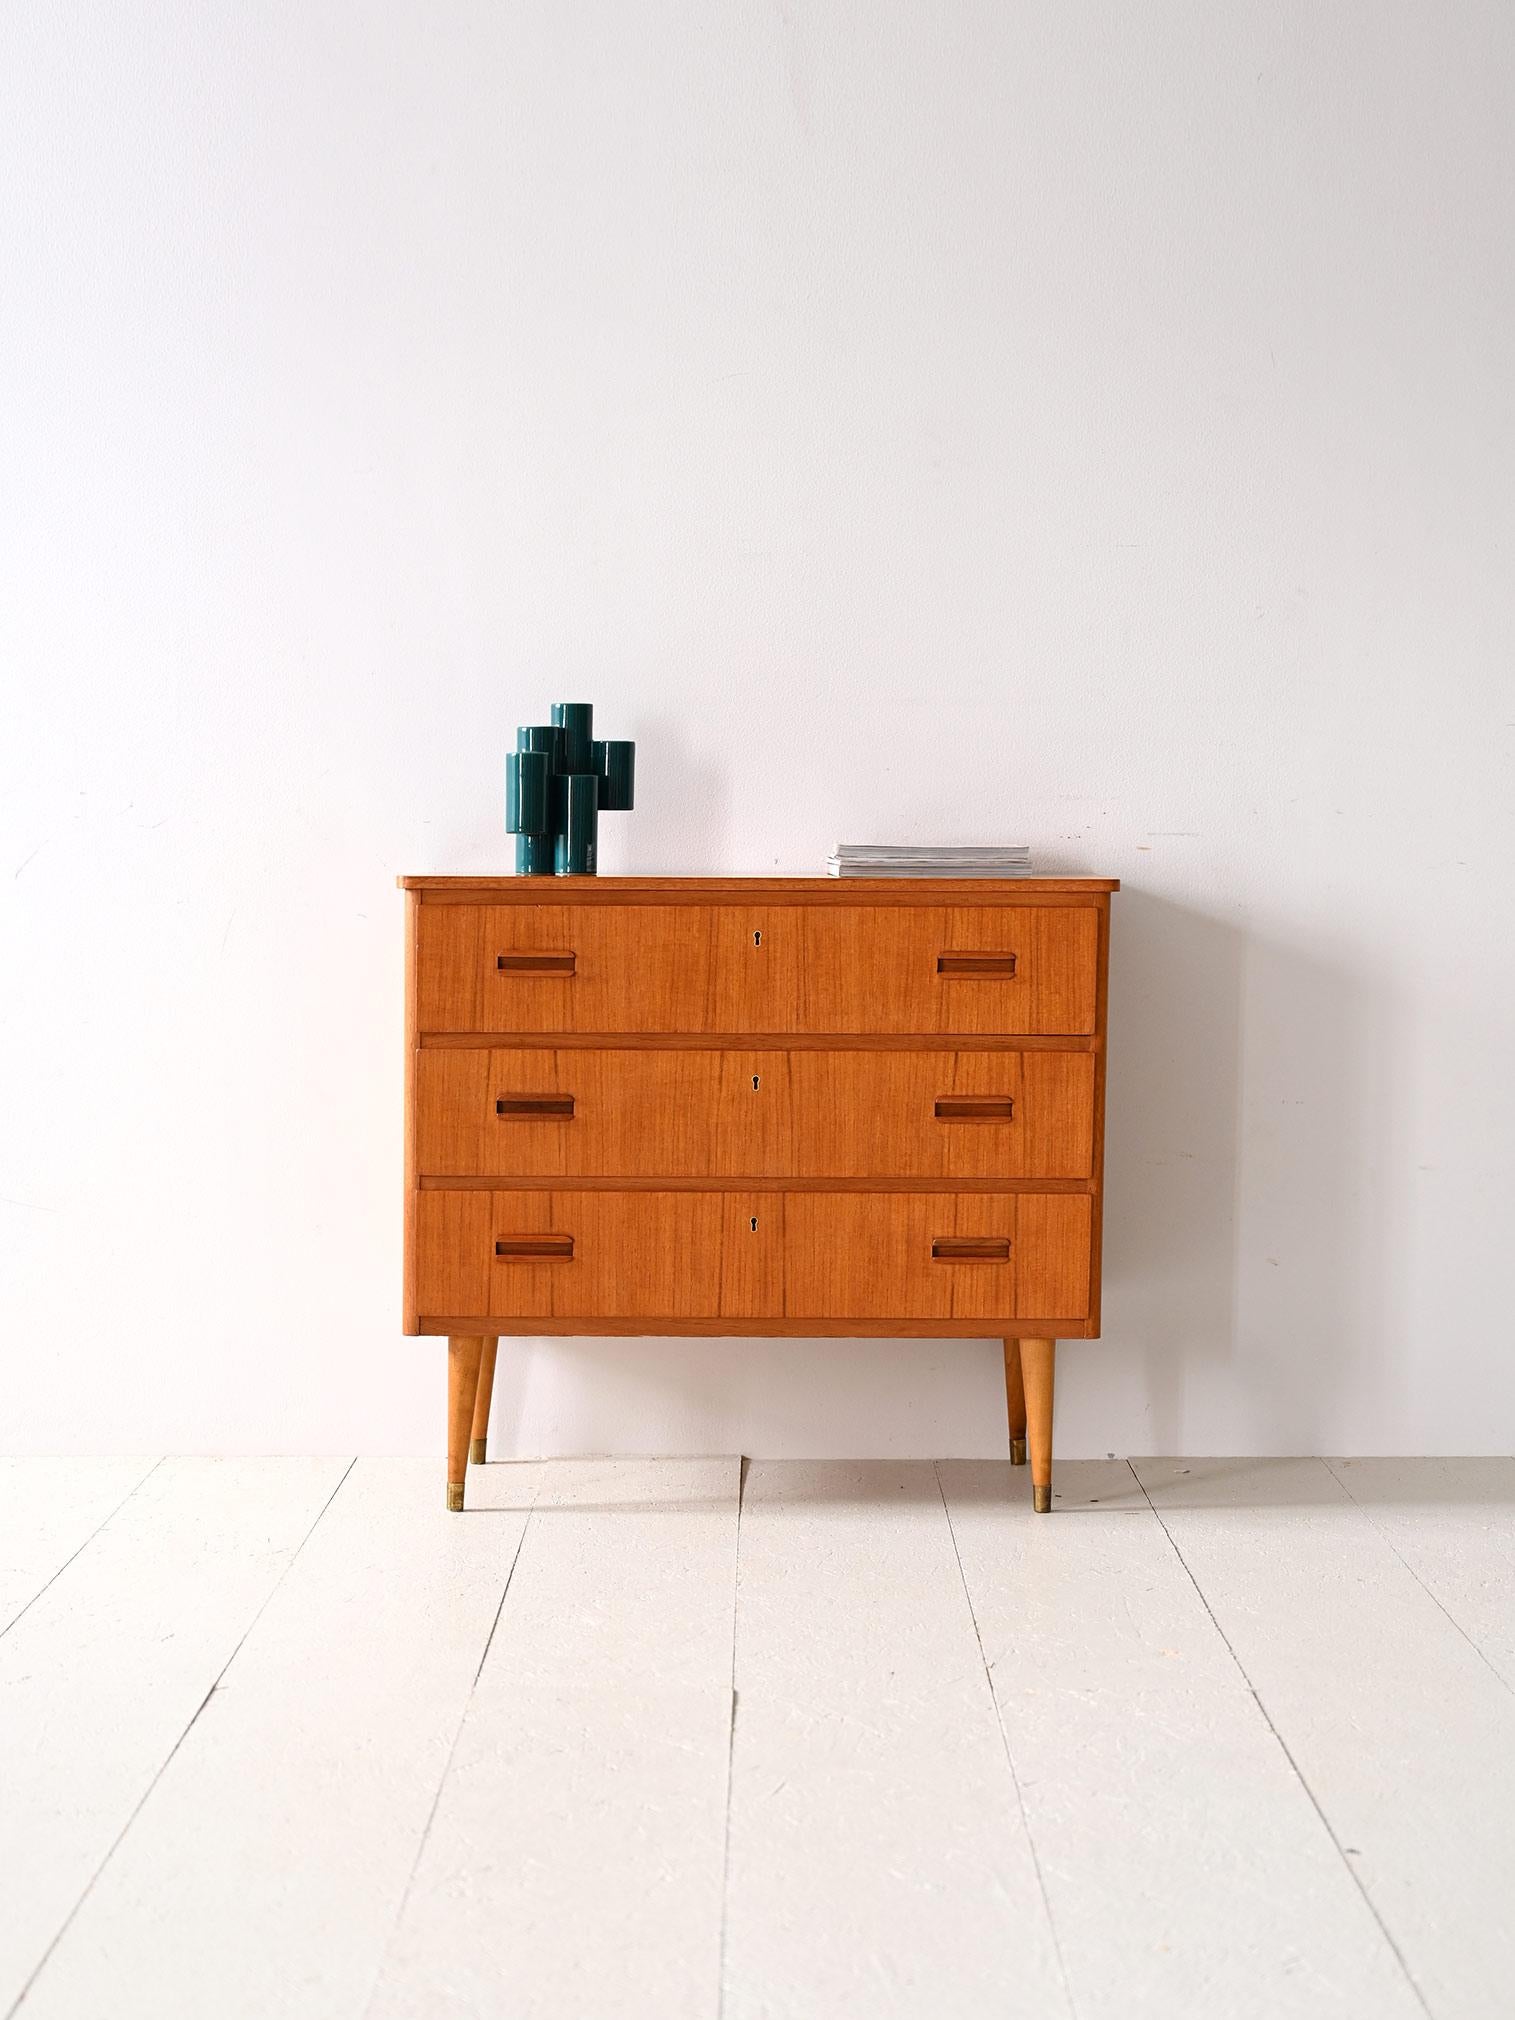 Scandinavian 1960s cabinet with three drawers.

A piece of furniture with modern lines and refined details that is distinguished by the distinctive shape of the drawer handles and the presence of brass ferrules. 
The teak frame consists of three